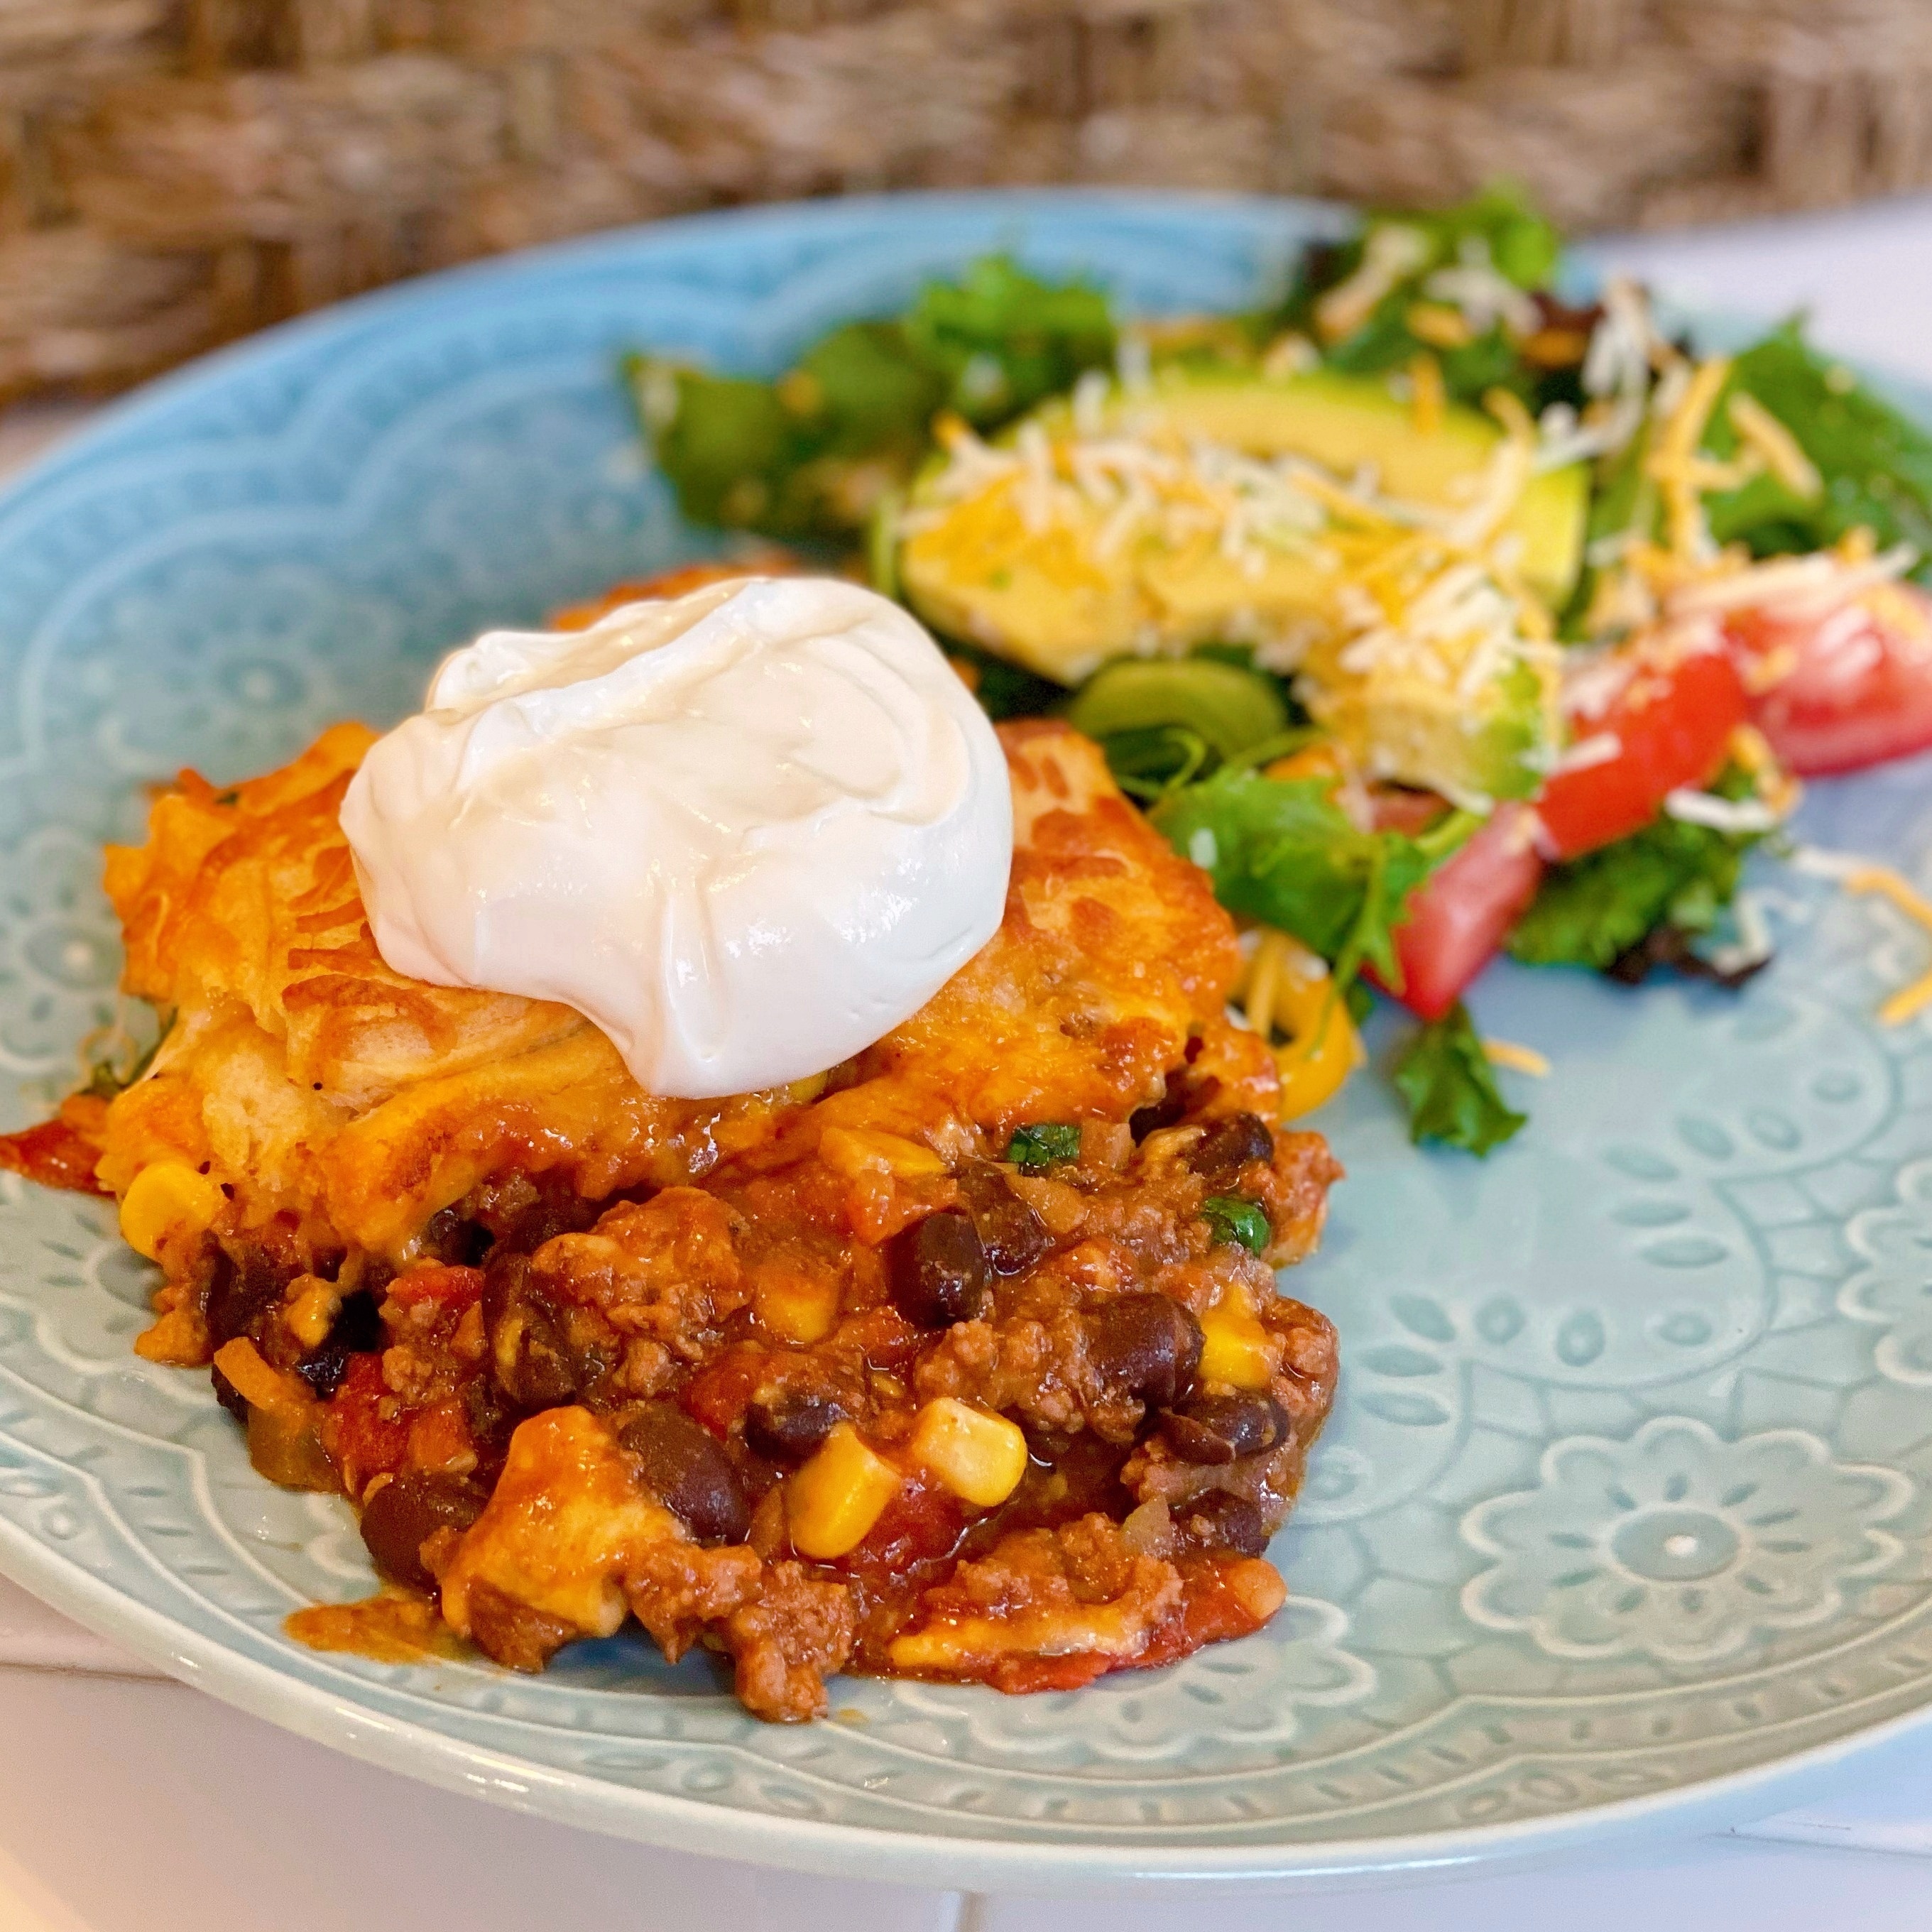 Cornbread Chili Taco Casserole on a dinner plate topped with sour cream and served with a side salad.